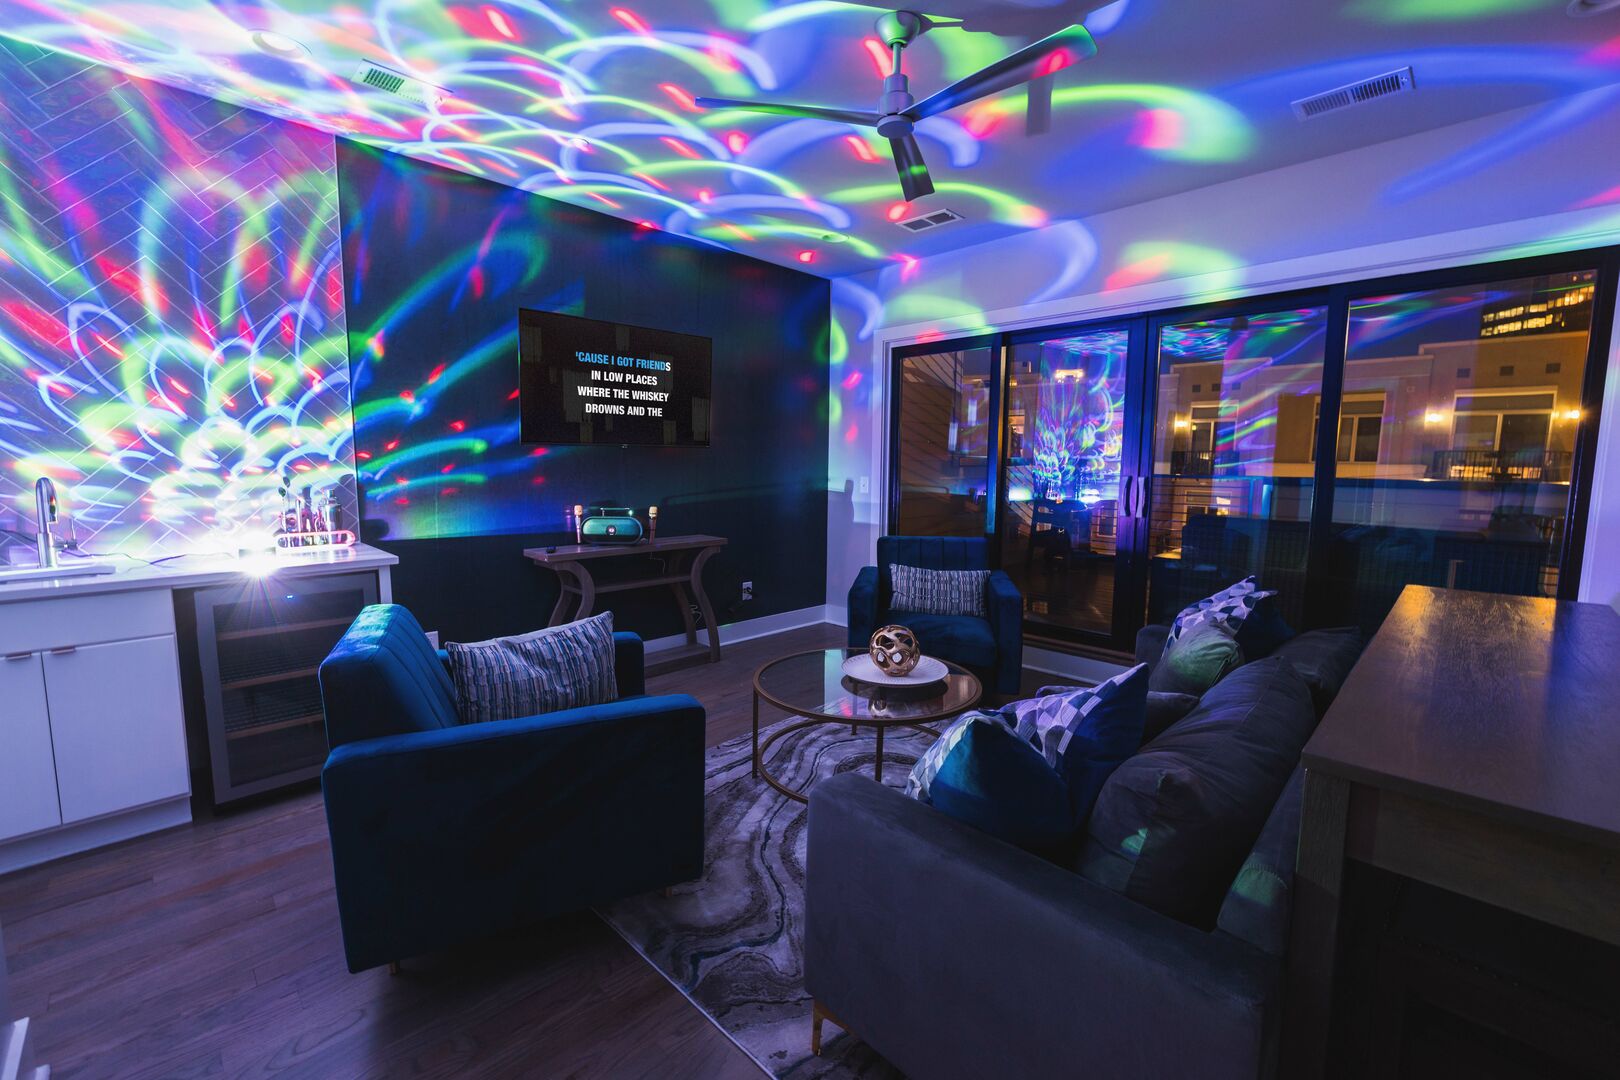 Top floor living space with wet bar, smart TV, karaoke, colorful light display, and access to rooftop patio!